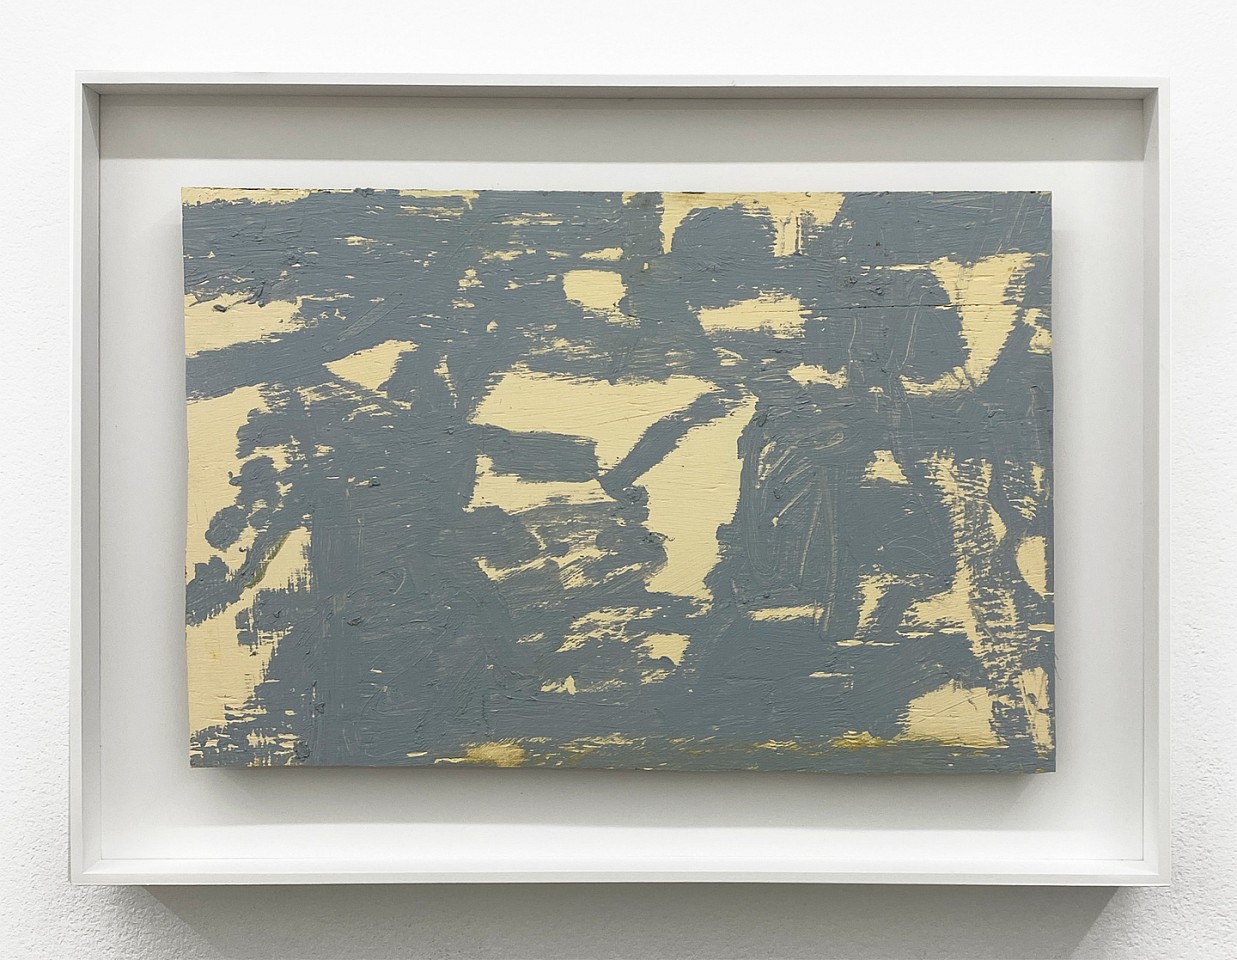 Sean Noonan
Untitled, 2023
noon041
oil on found wood, 16 x 21 3/4 inches framed